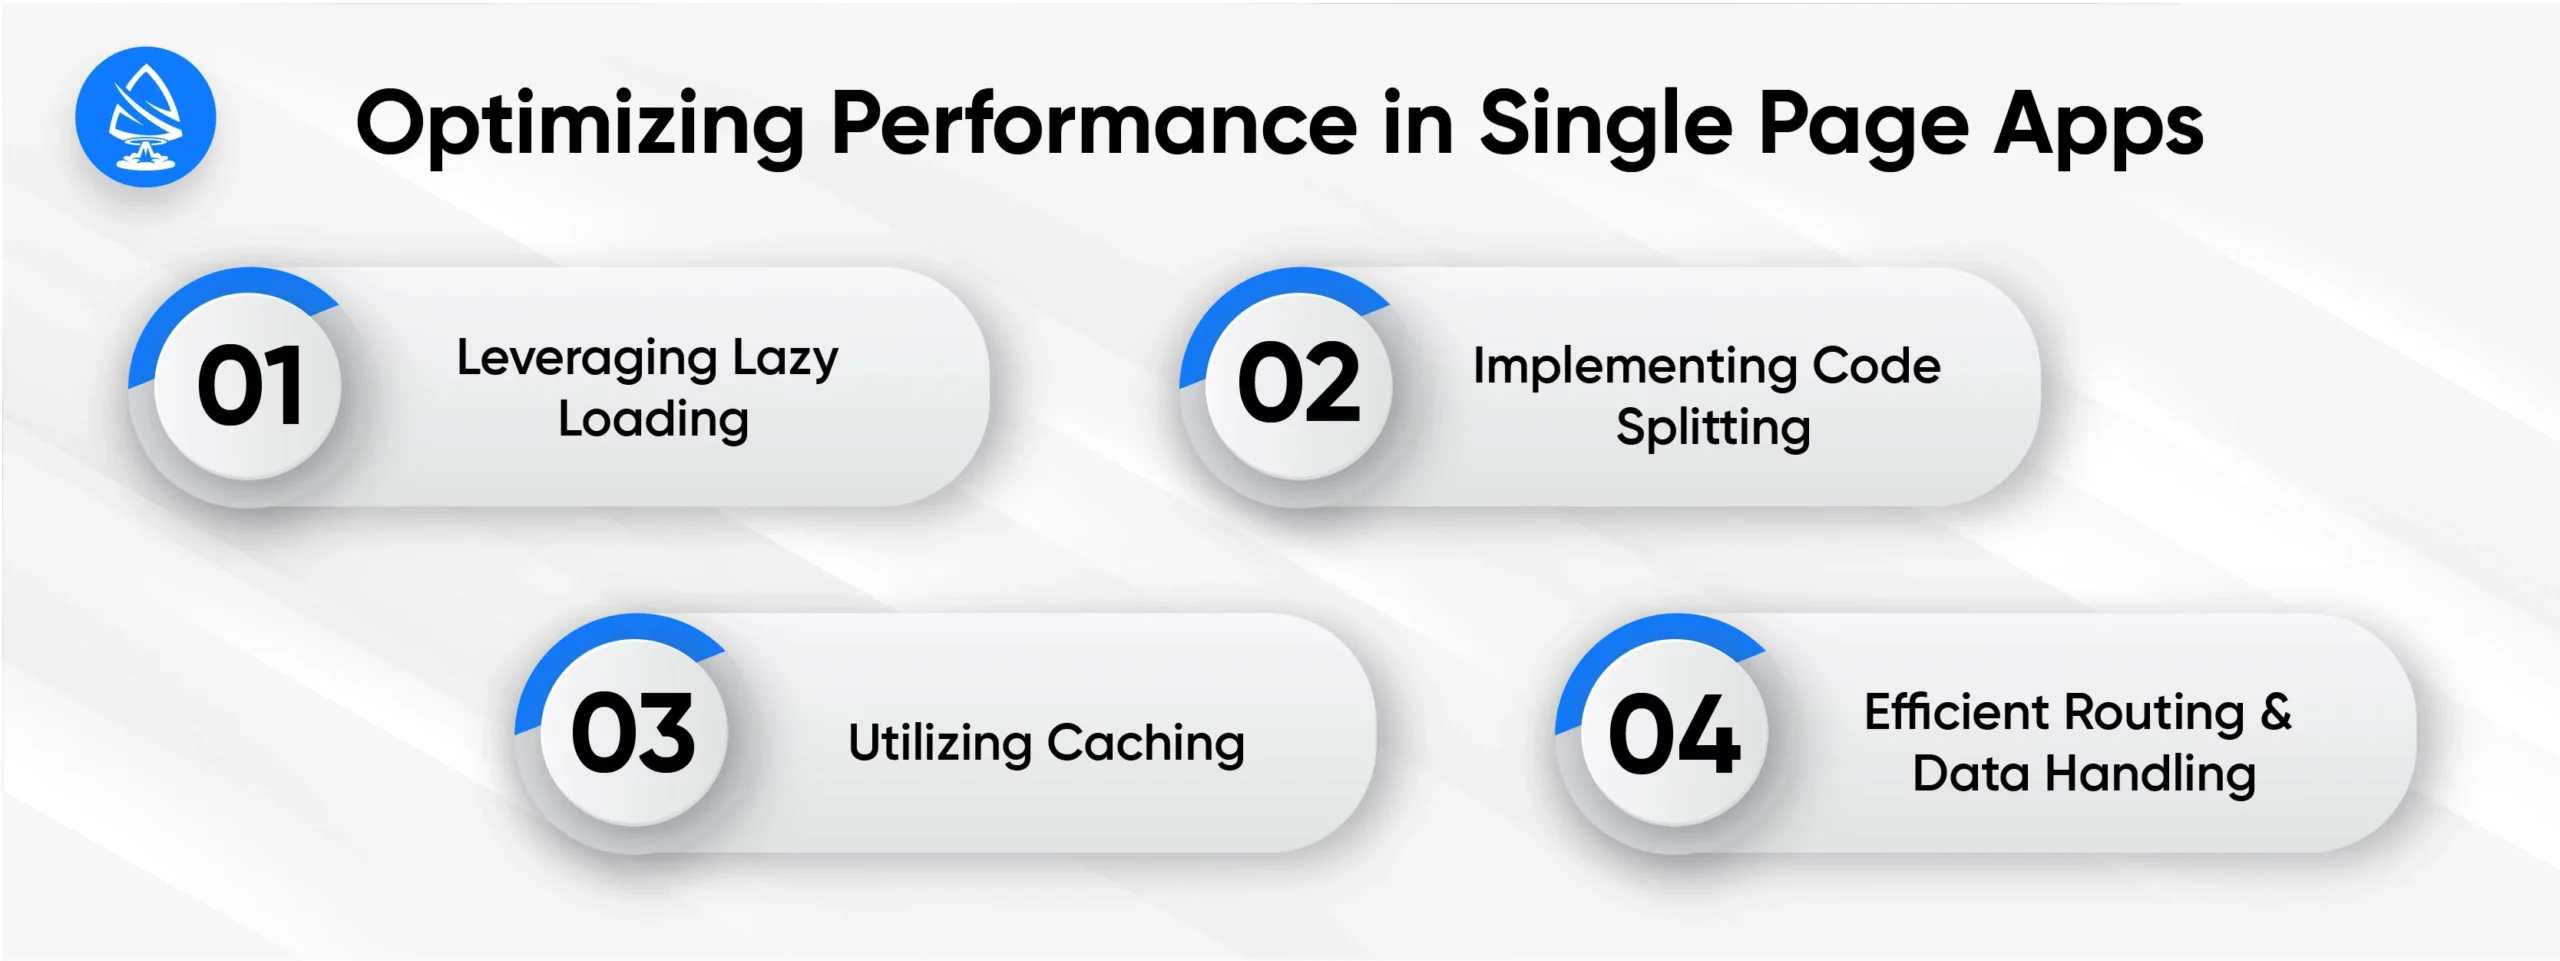 Optimizing Performance in Single Page Apps